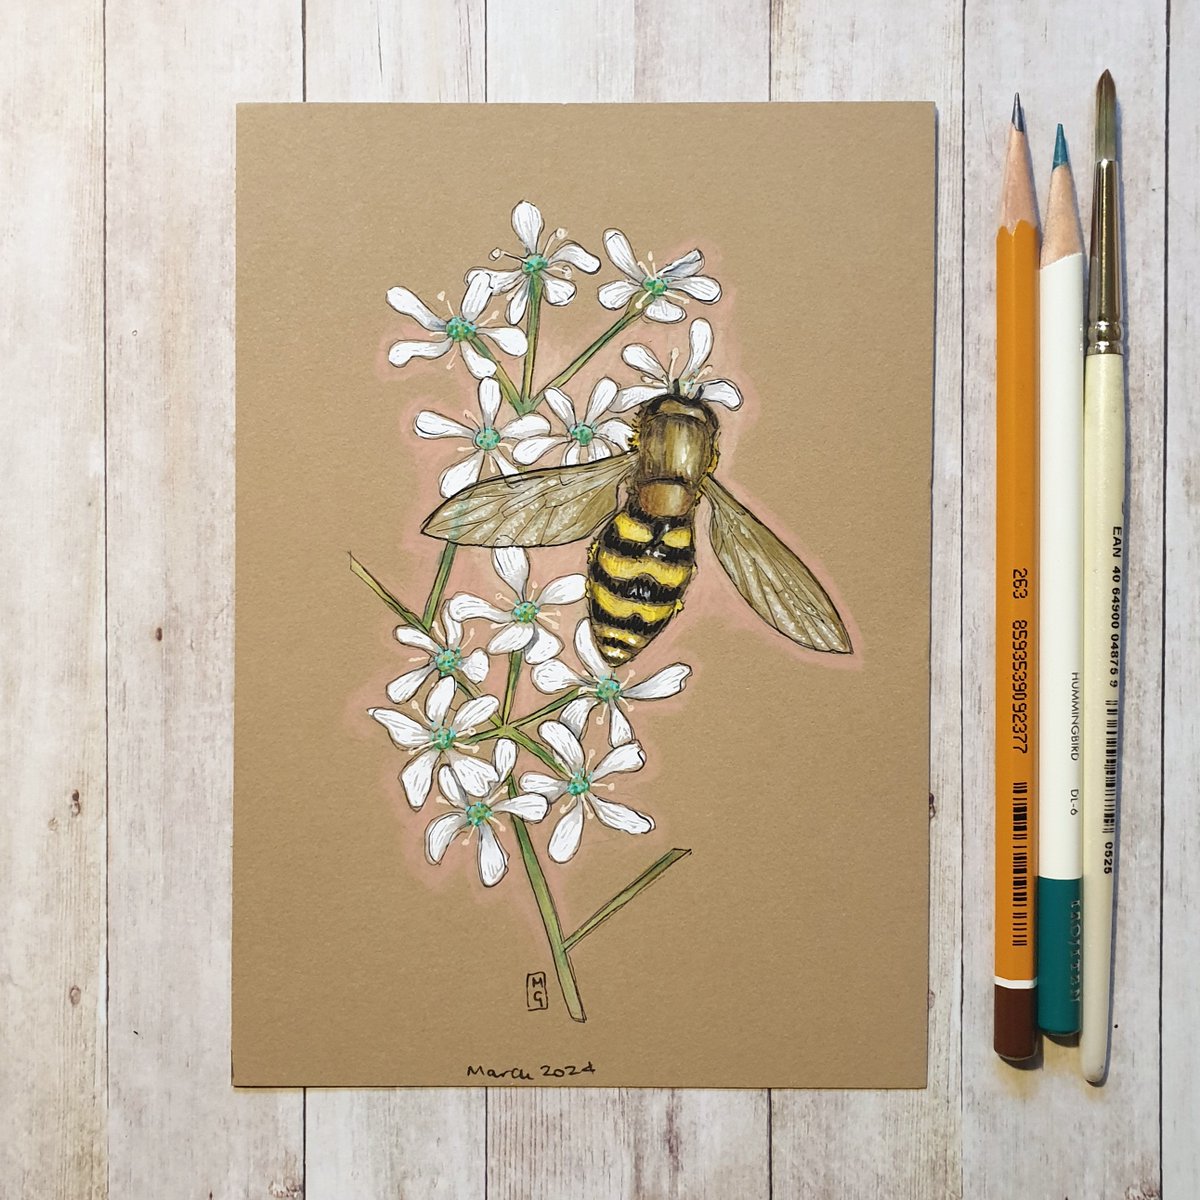 ⭐️New⭐️
Hoverflies are great pollinators.  They get their name from their ability to hover in mid-air.  Many hoverflies mimic wasps or bees, but hoverflies do not sting.
You can find my drawing here
theweeowlstudio.etsy.com/listing/169416…
#Hoverfly #insect #OriginalArt #drawing #TraditionalArt